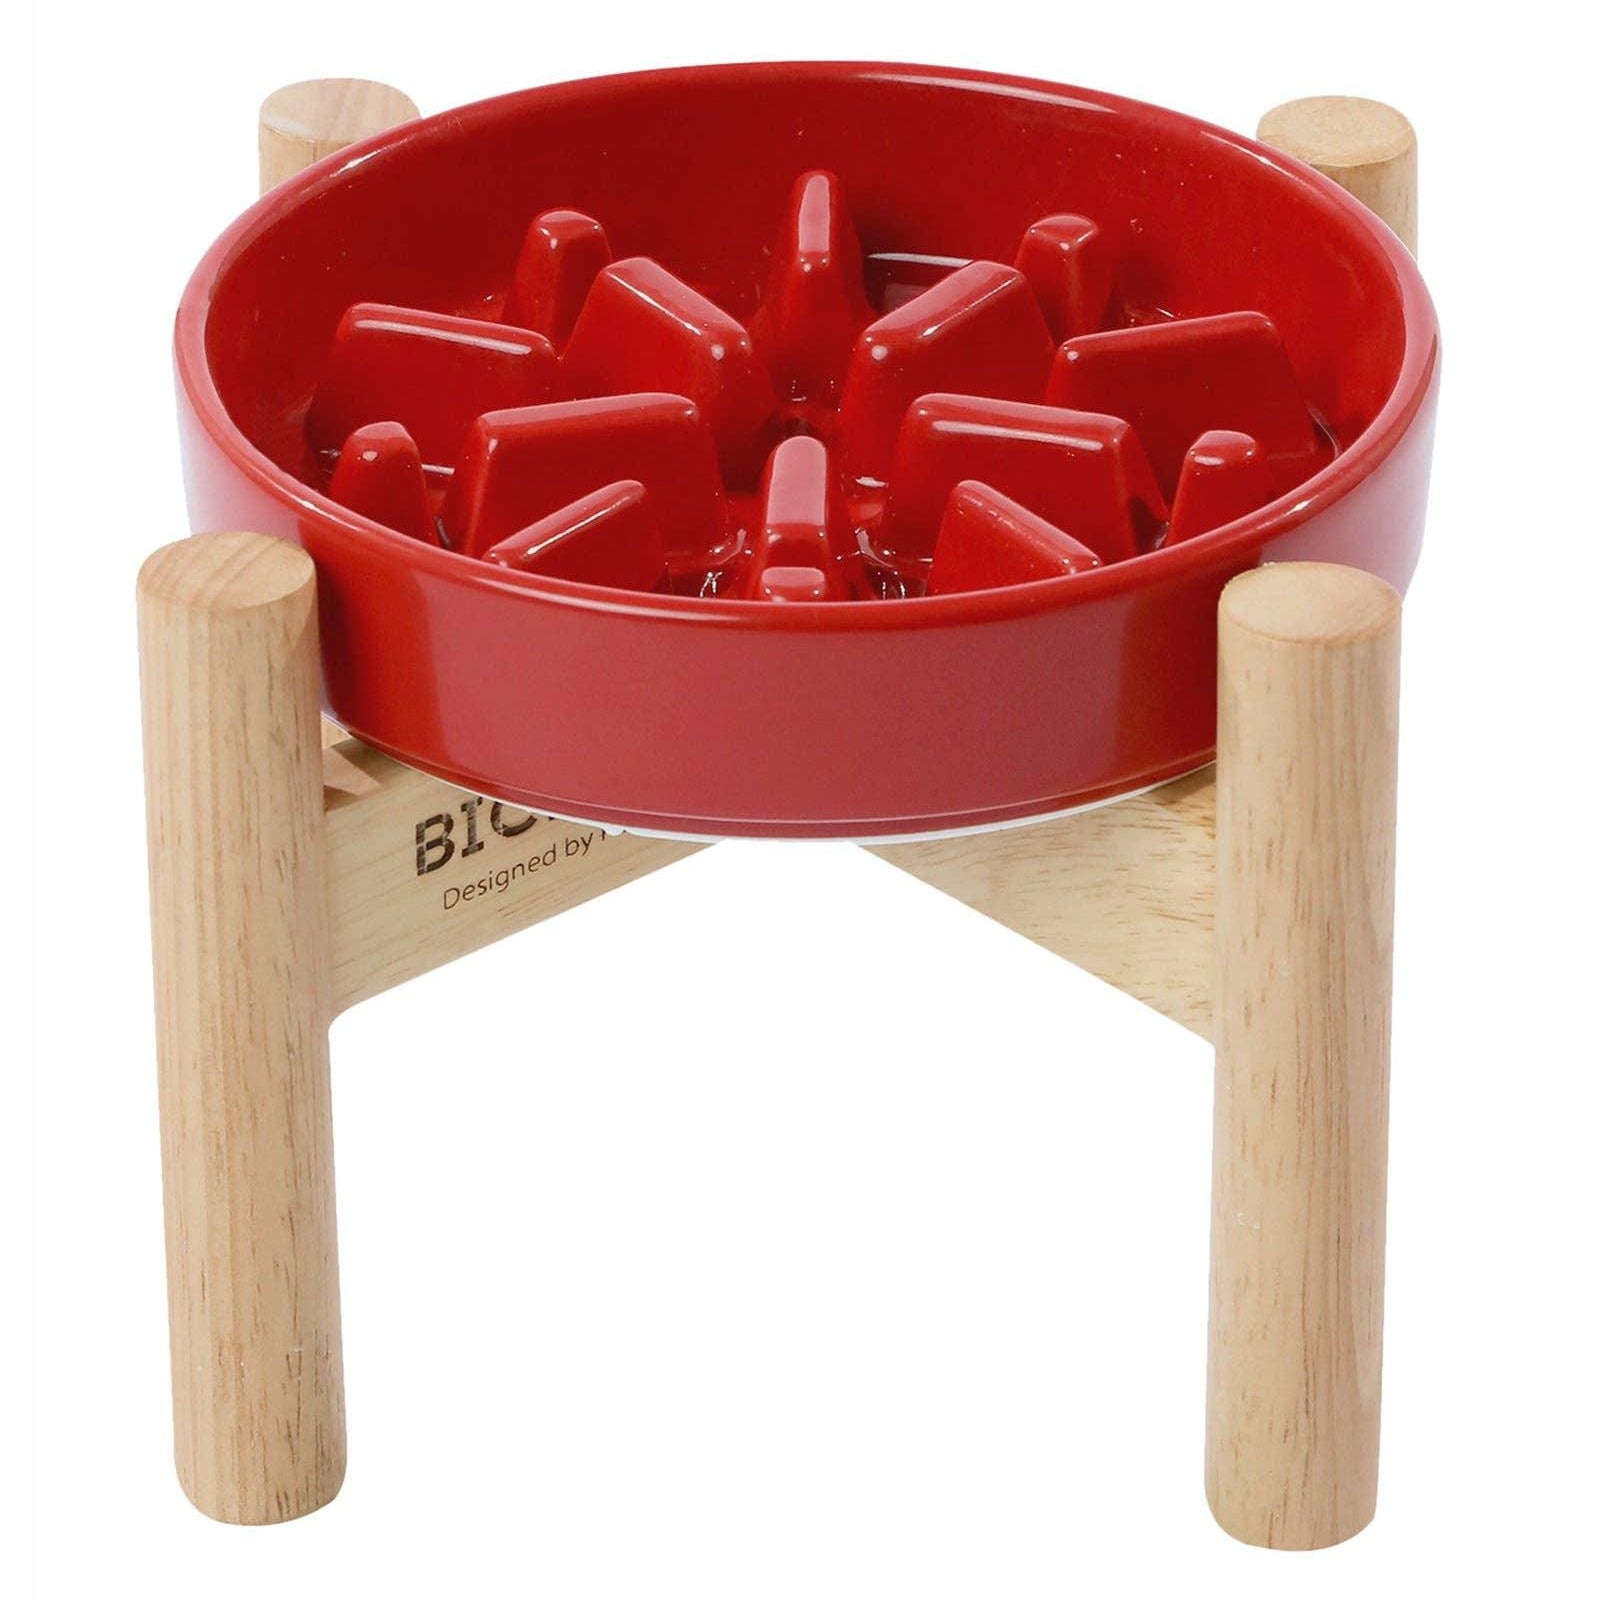 [Spark] Slow Feeder Dog Bowls - M / Blue / Wood Stand - Rocky & Maggie's Pet Boutique and Salon